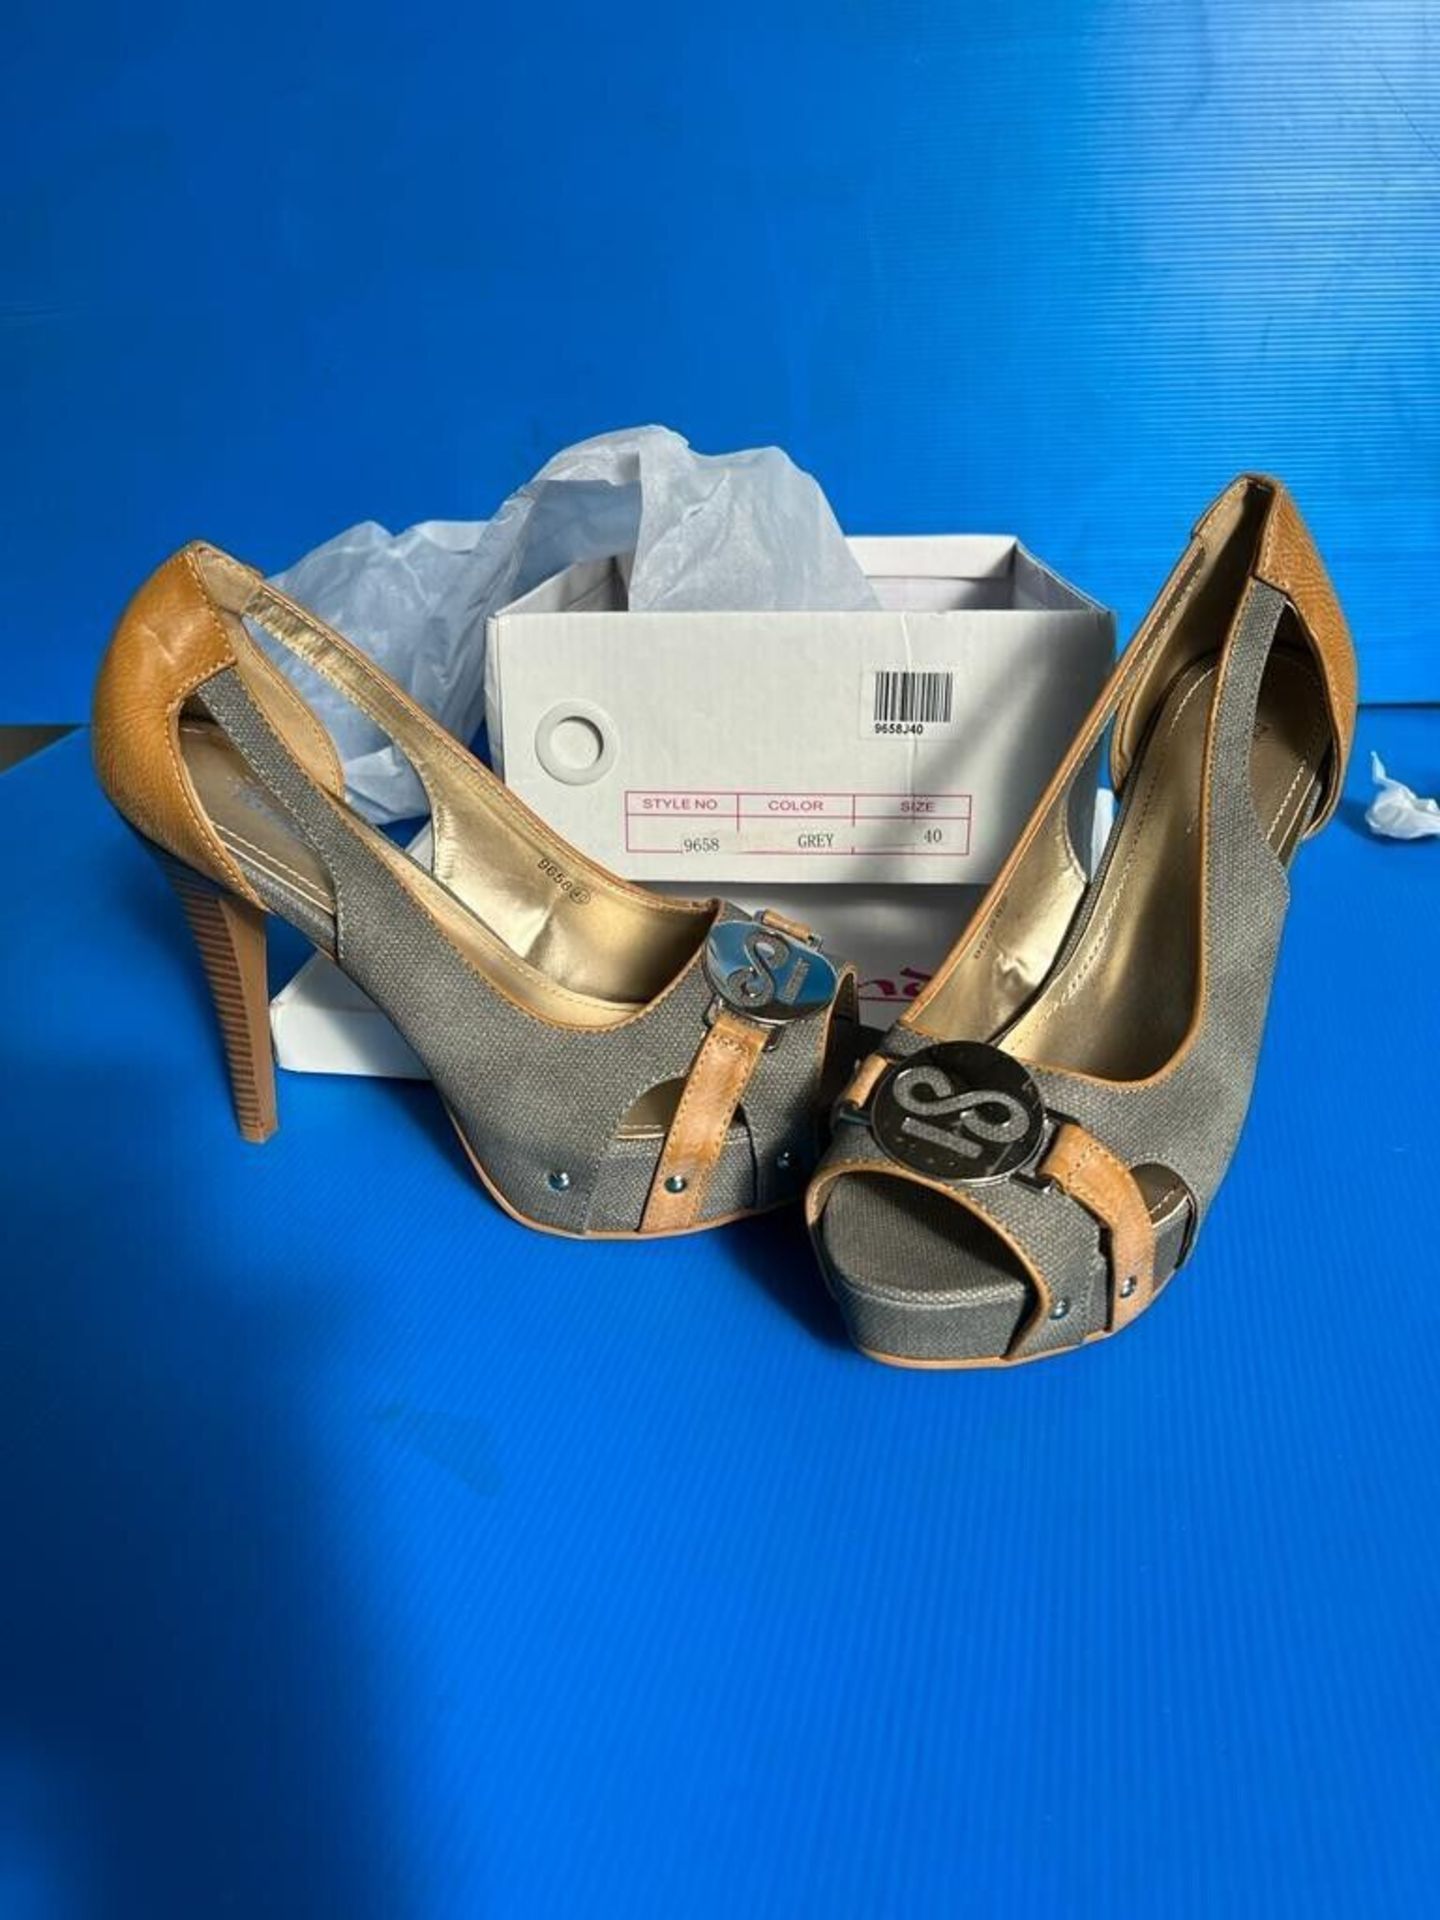 X50 BRAND NEW PAIRS WOMENS HIGH HEELS - MIXED STYLES AND SIZES RRP £1500 - Image 10 of 14